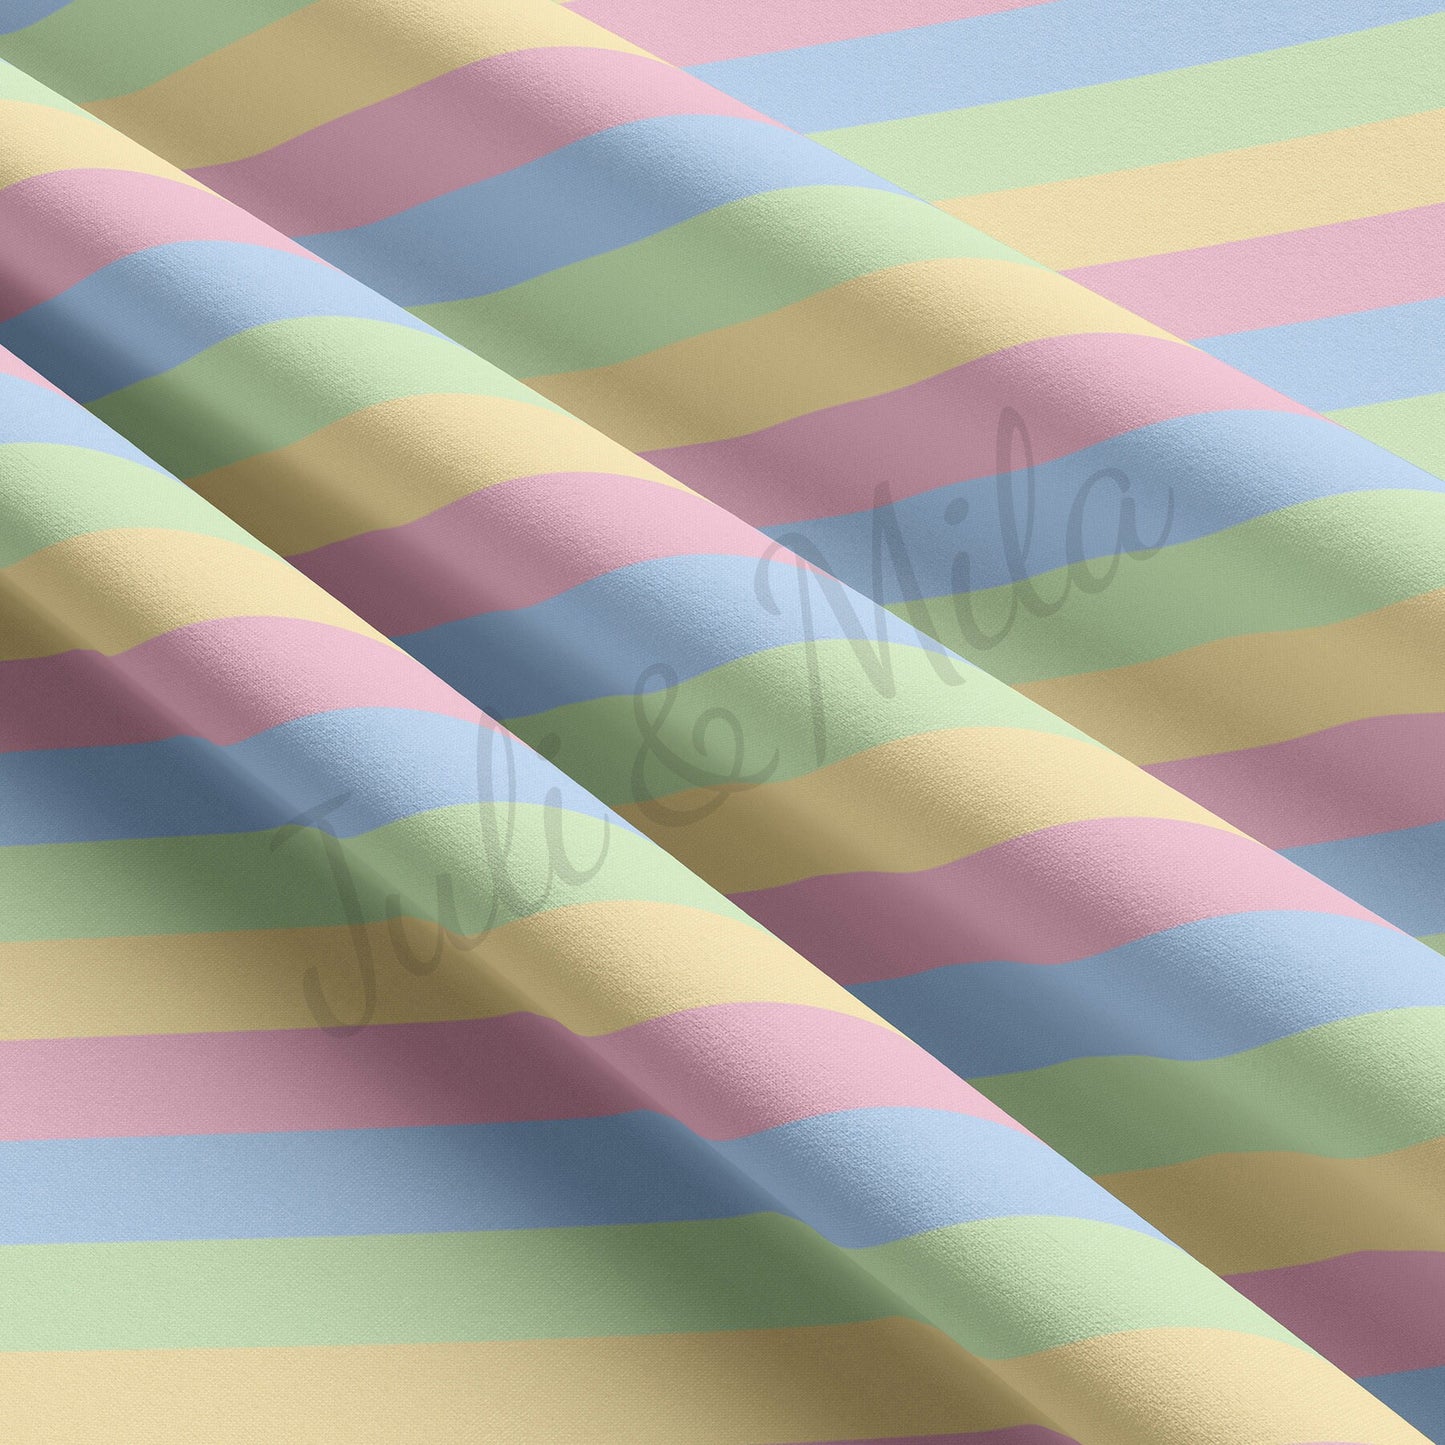 DBP Fabric Double Brushed Polyester Fabric DBP1459